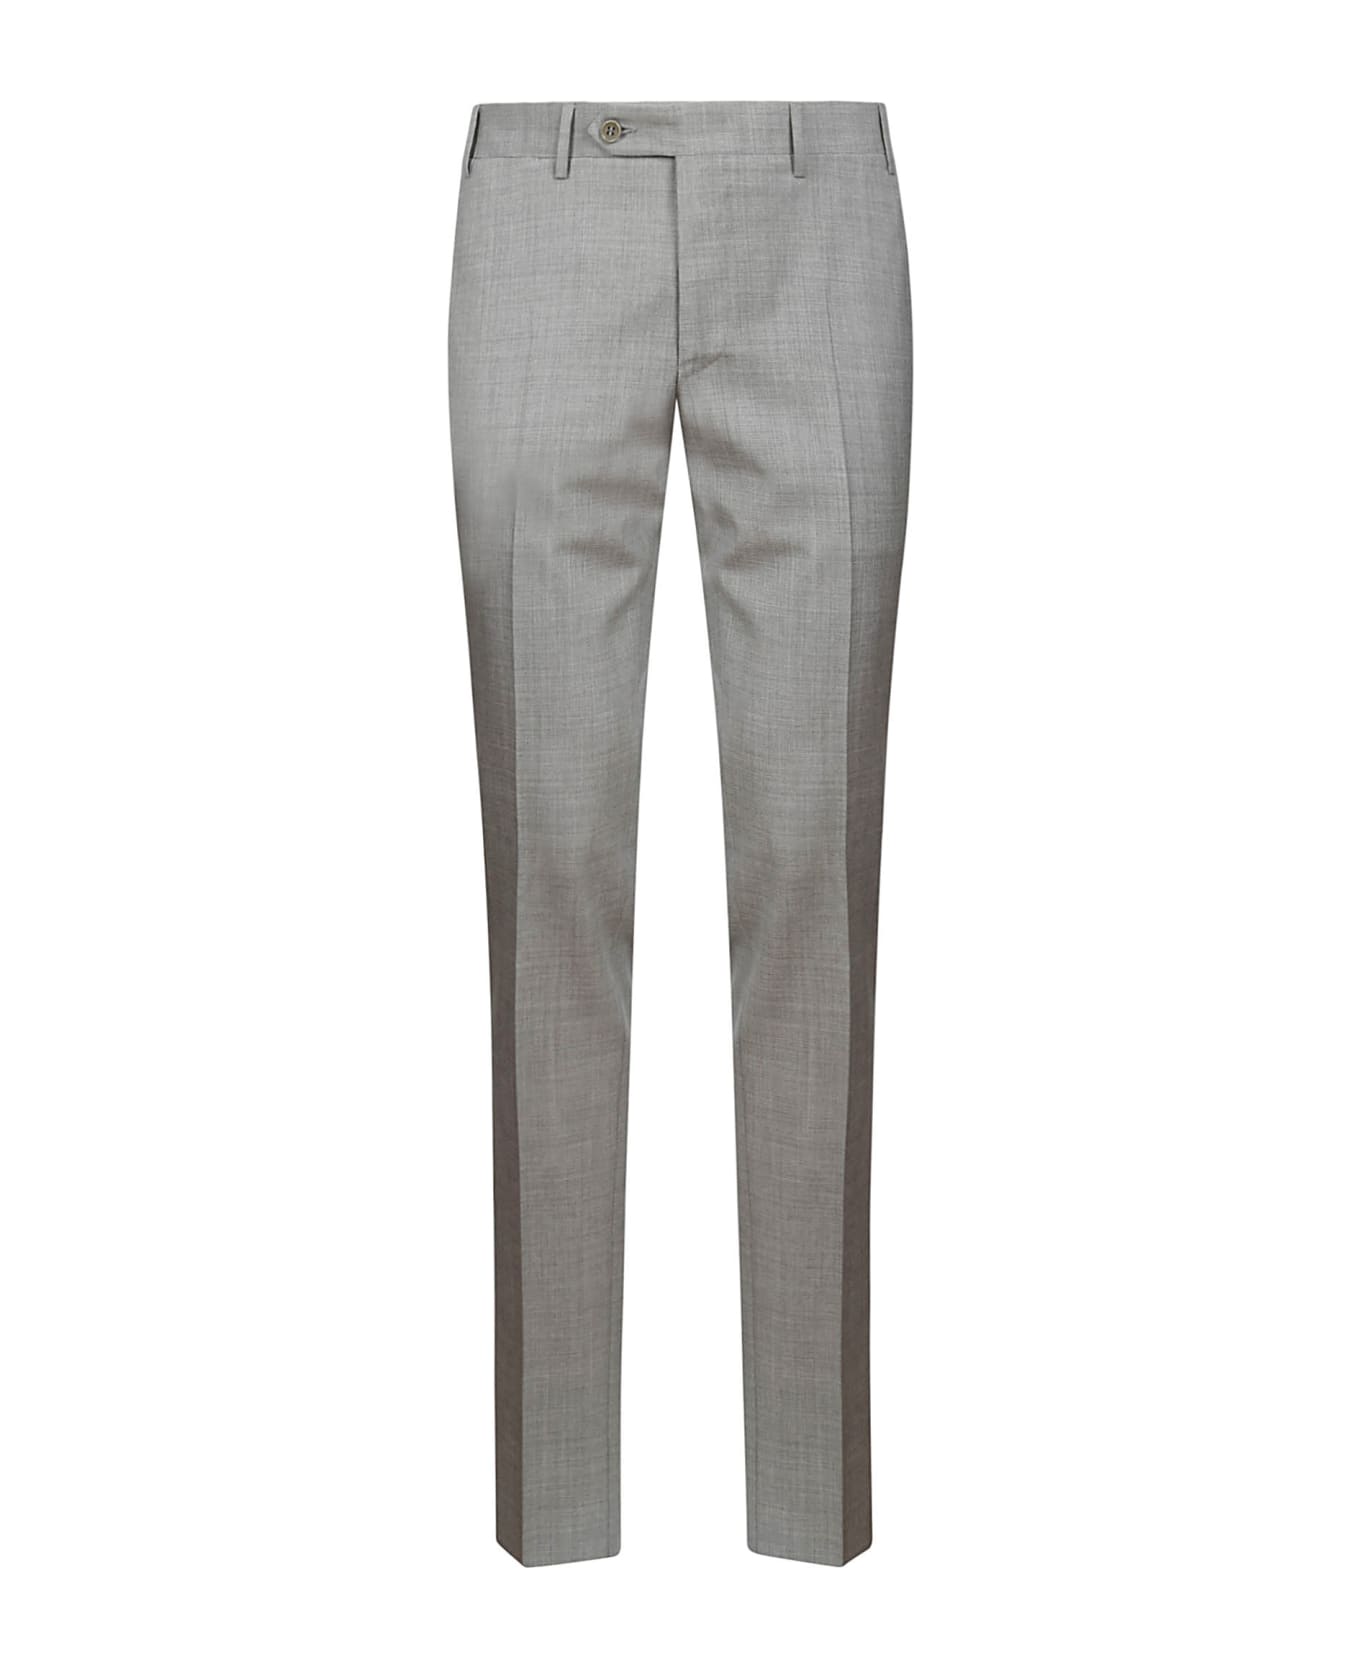 Canali Suit - Grey スーツ